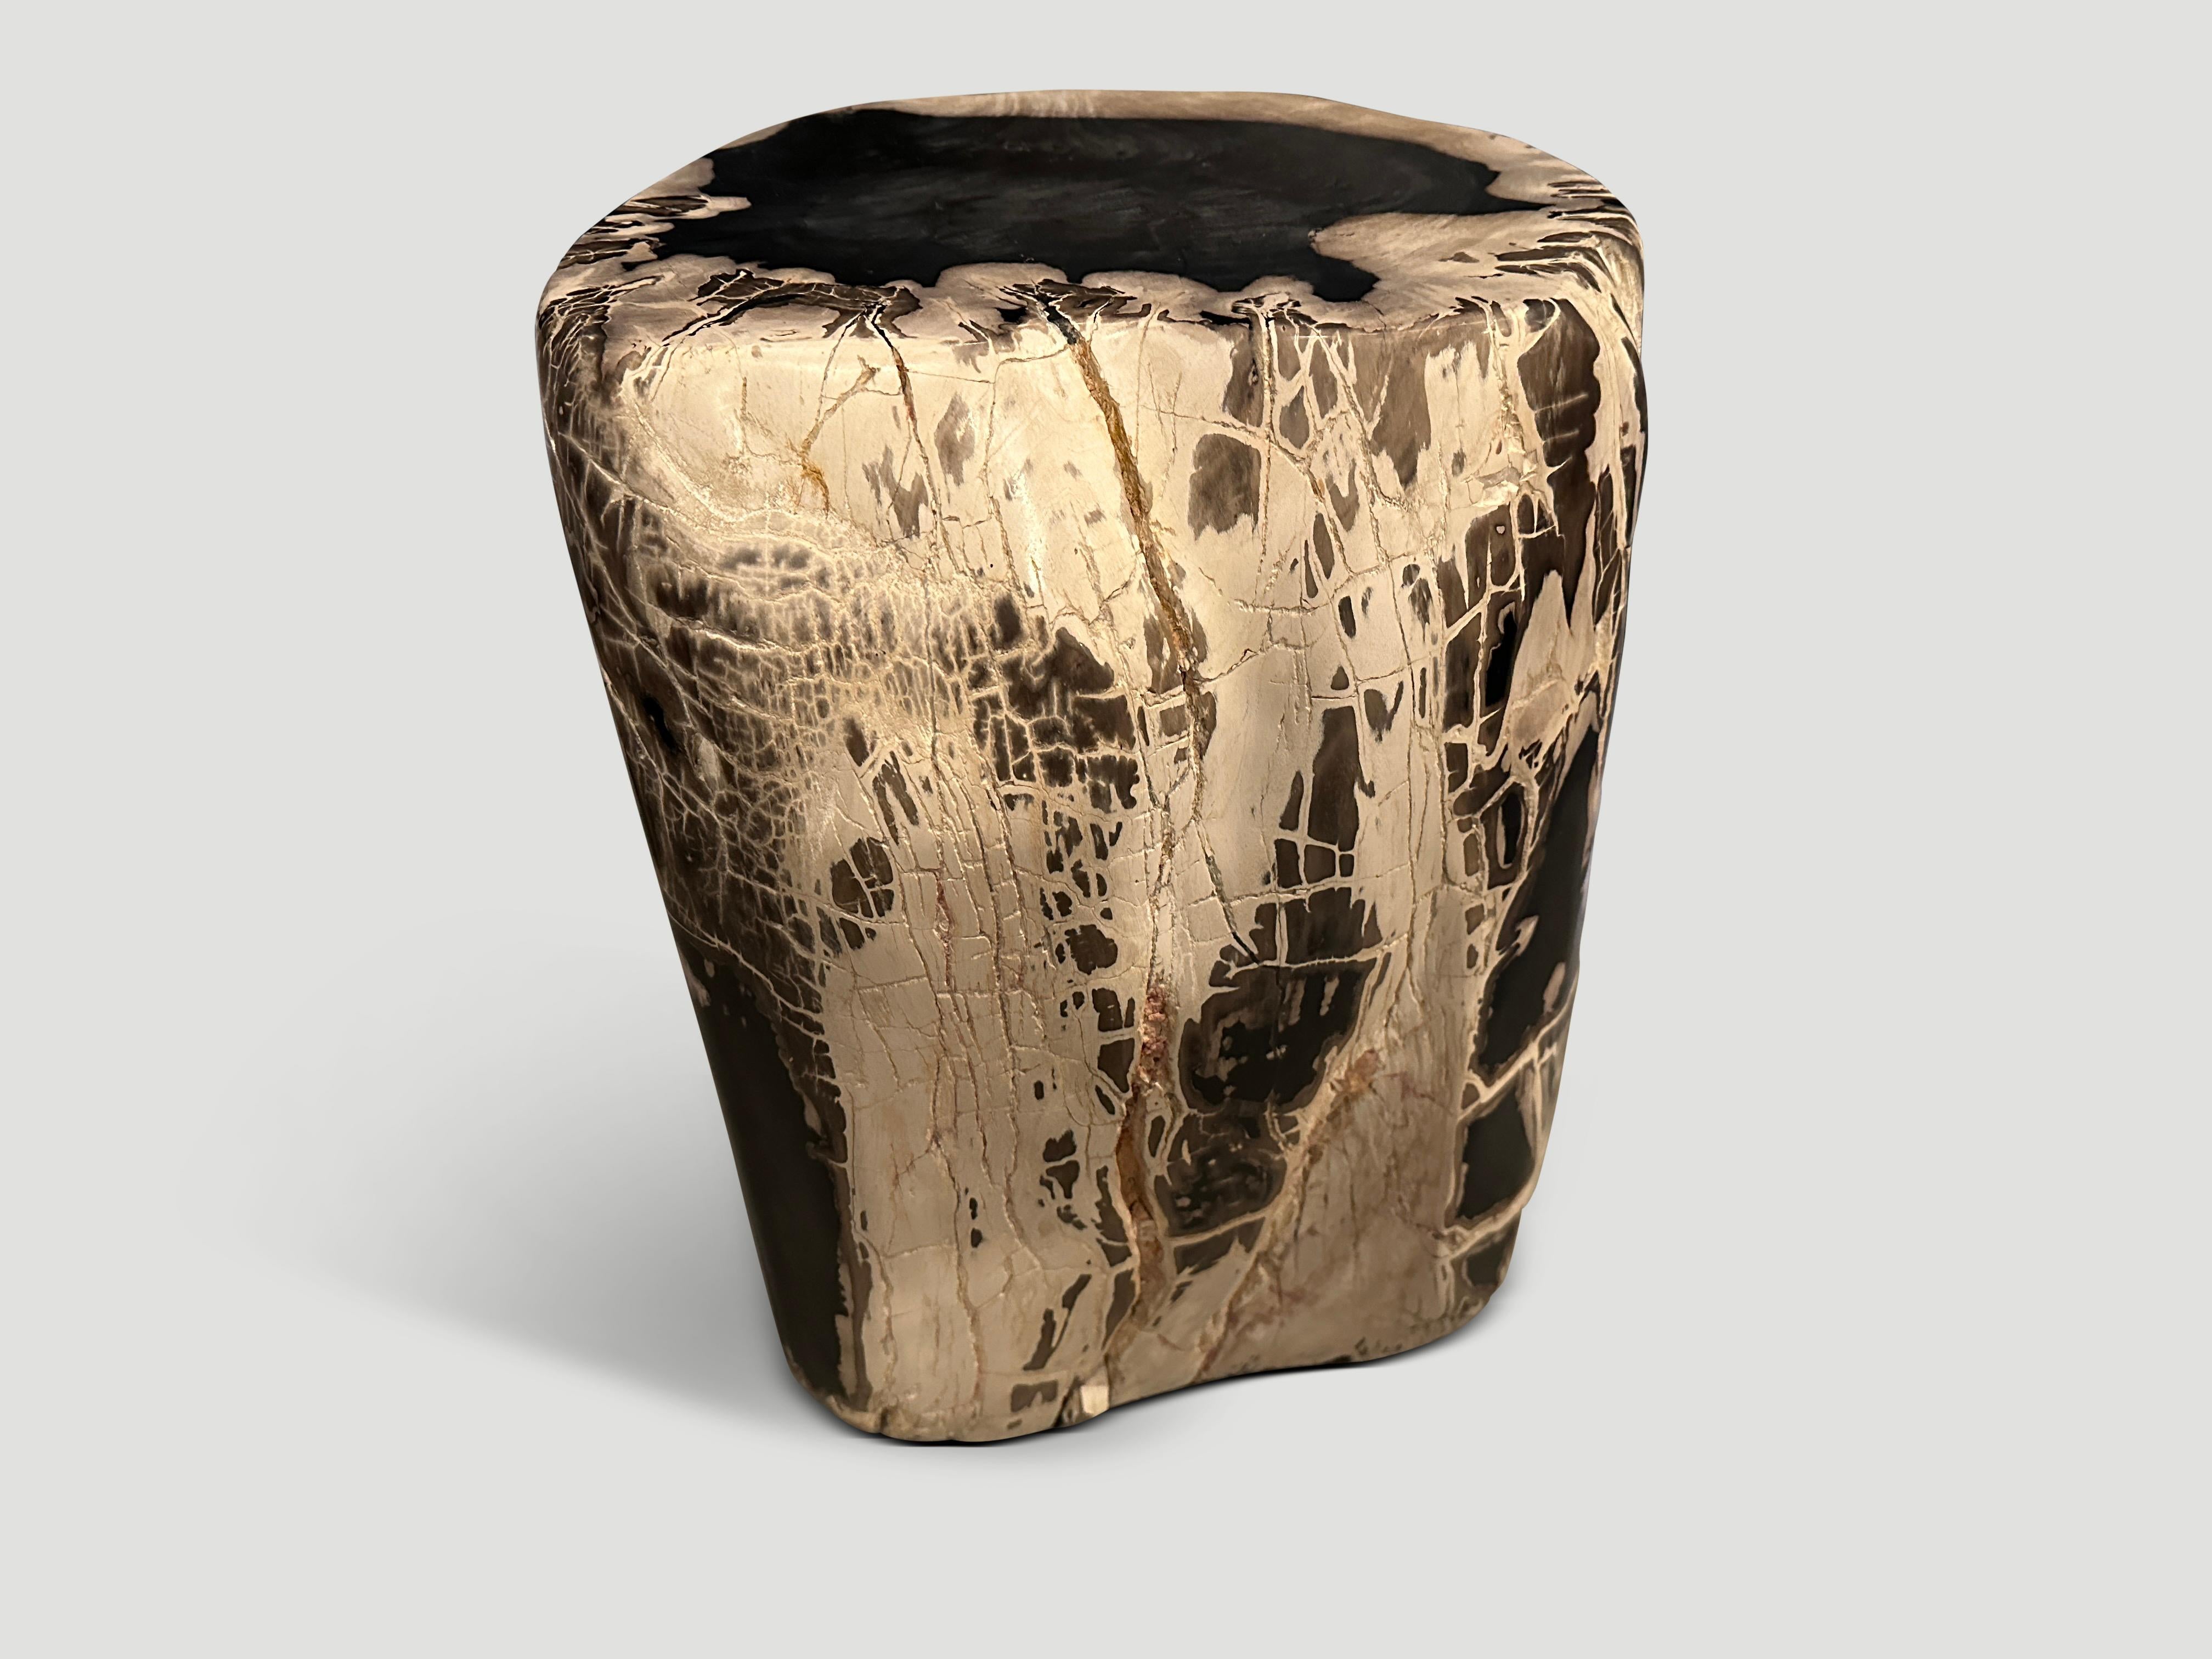 Andrianna Shamaris Exquisite High Quality Petrified Wood Side Table In Excellent Condition For Sale In New York, NY